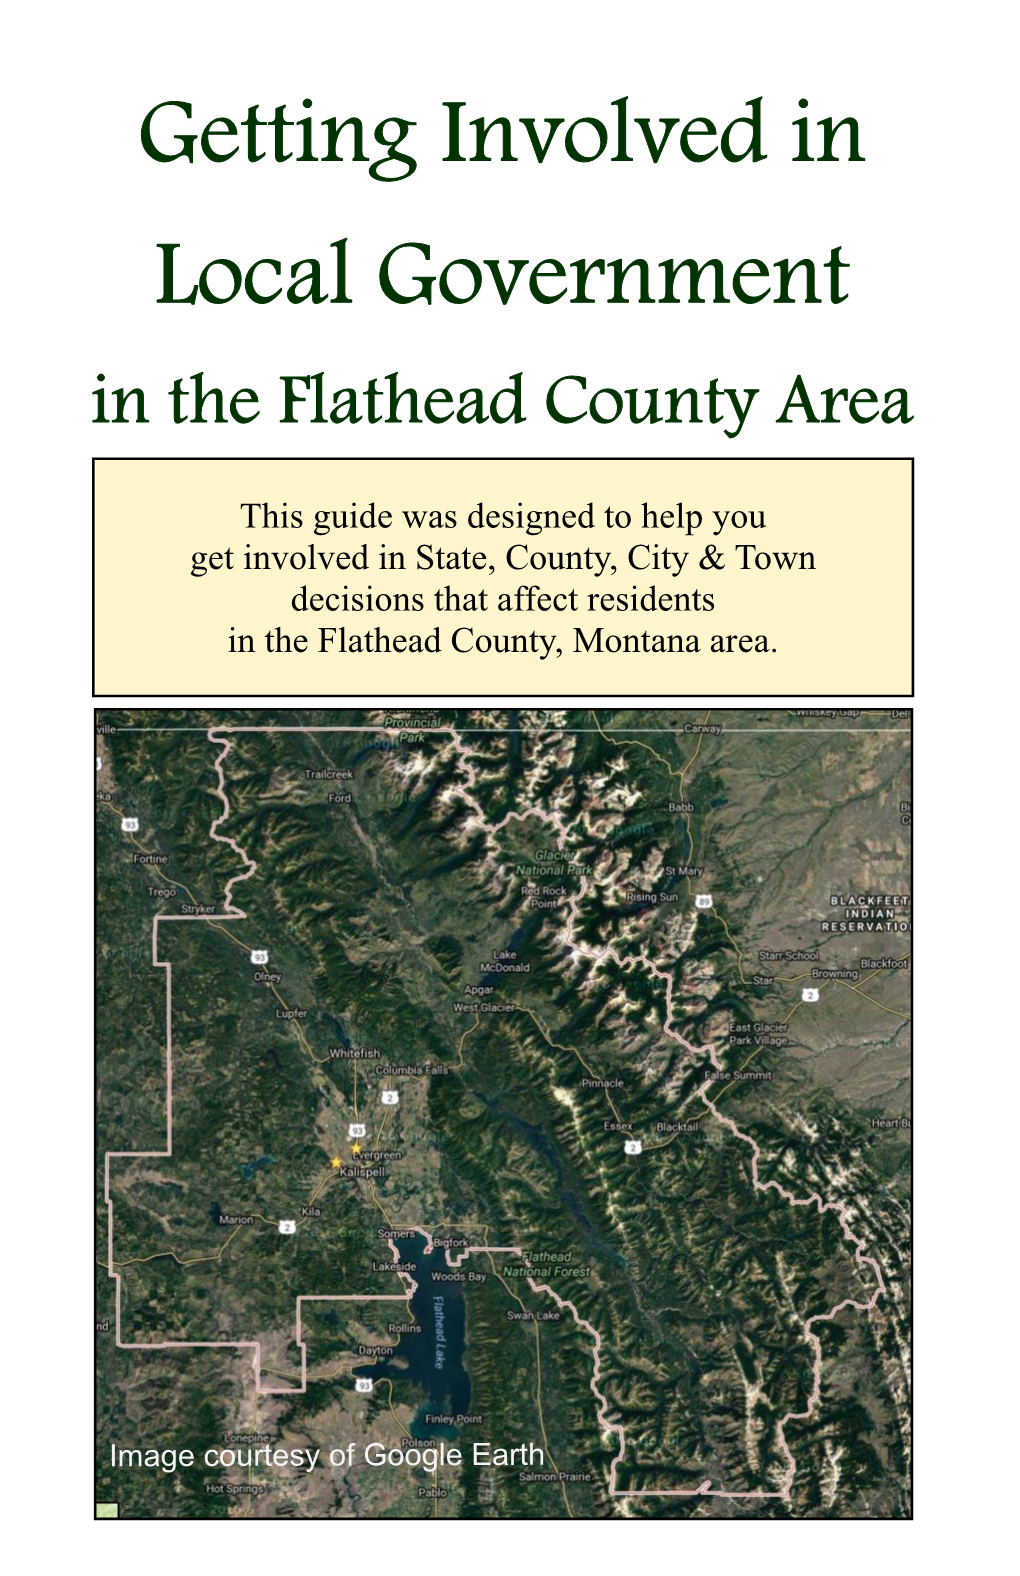 Getting Involved in Local Government in the Flathead County Area